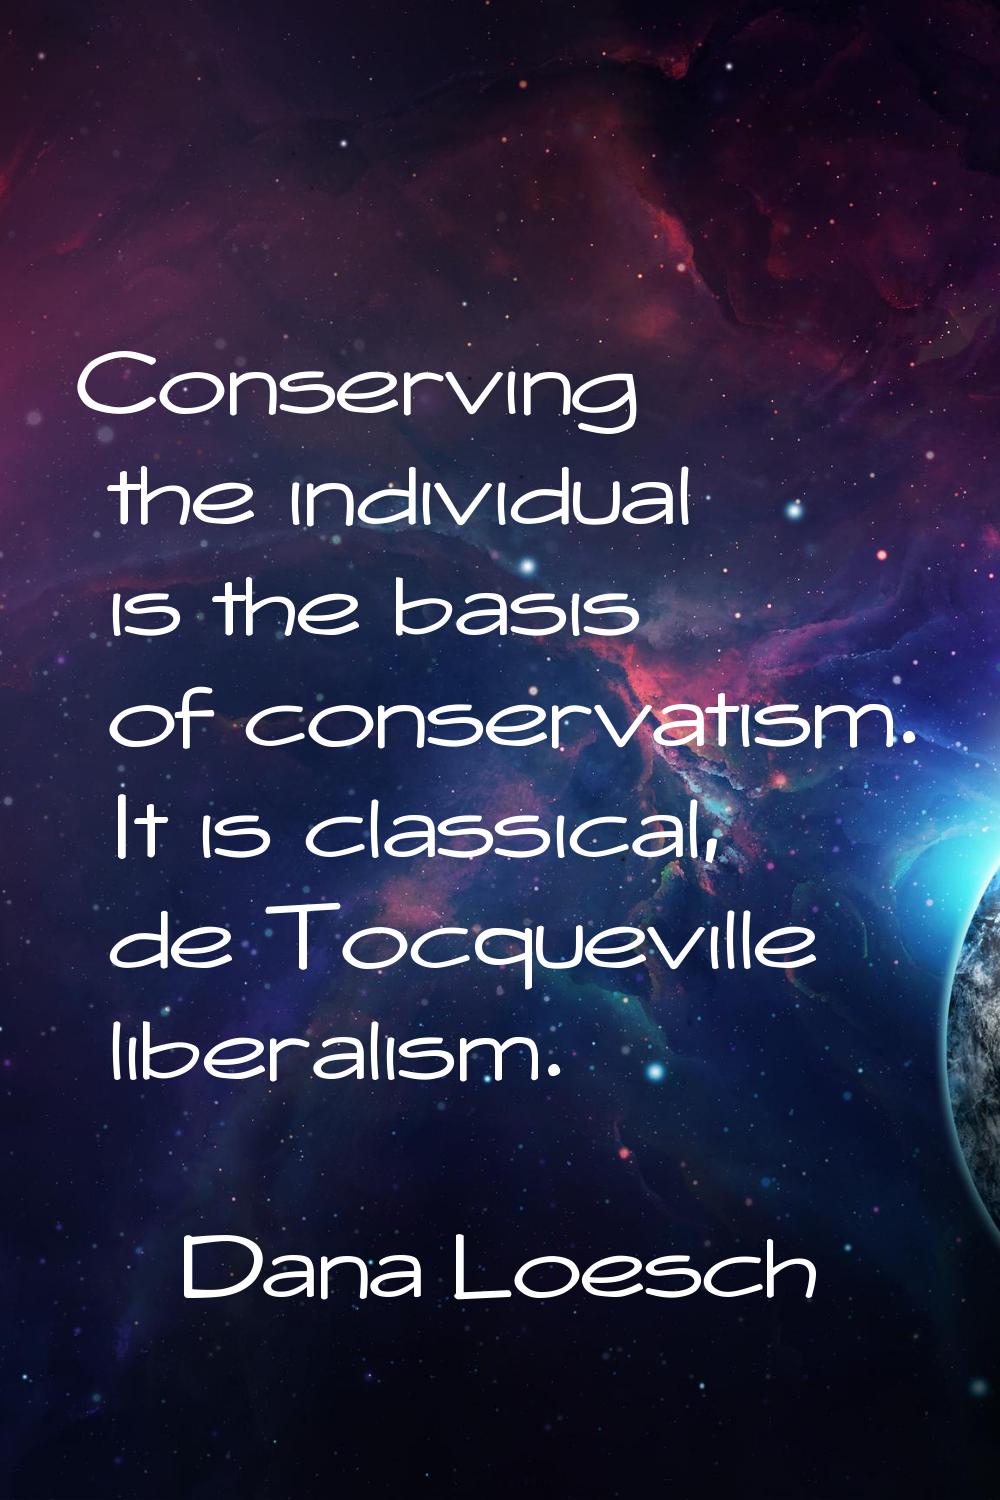 Conserving the individual is the basis of conservatism. It is classical, de Tocqueville liberalism.